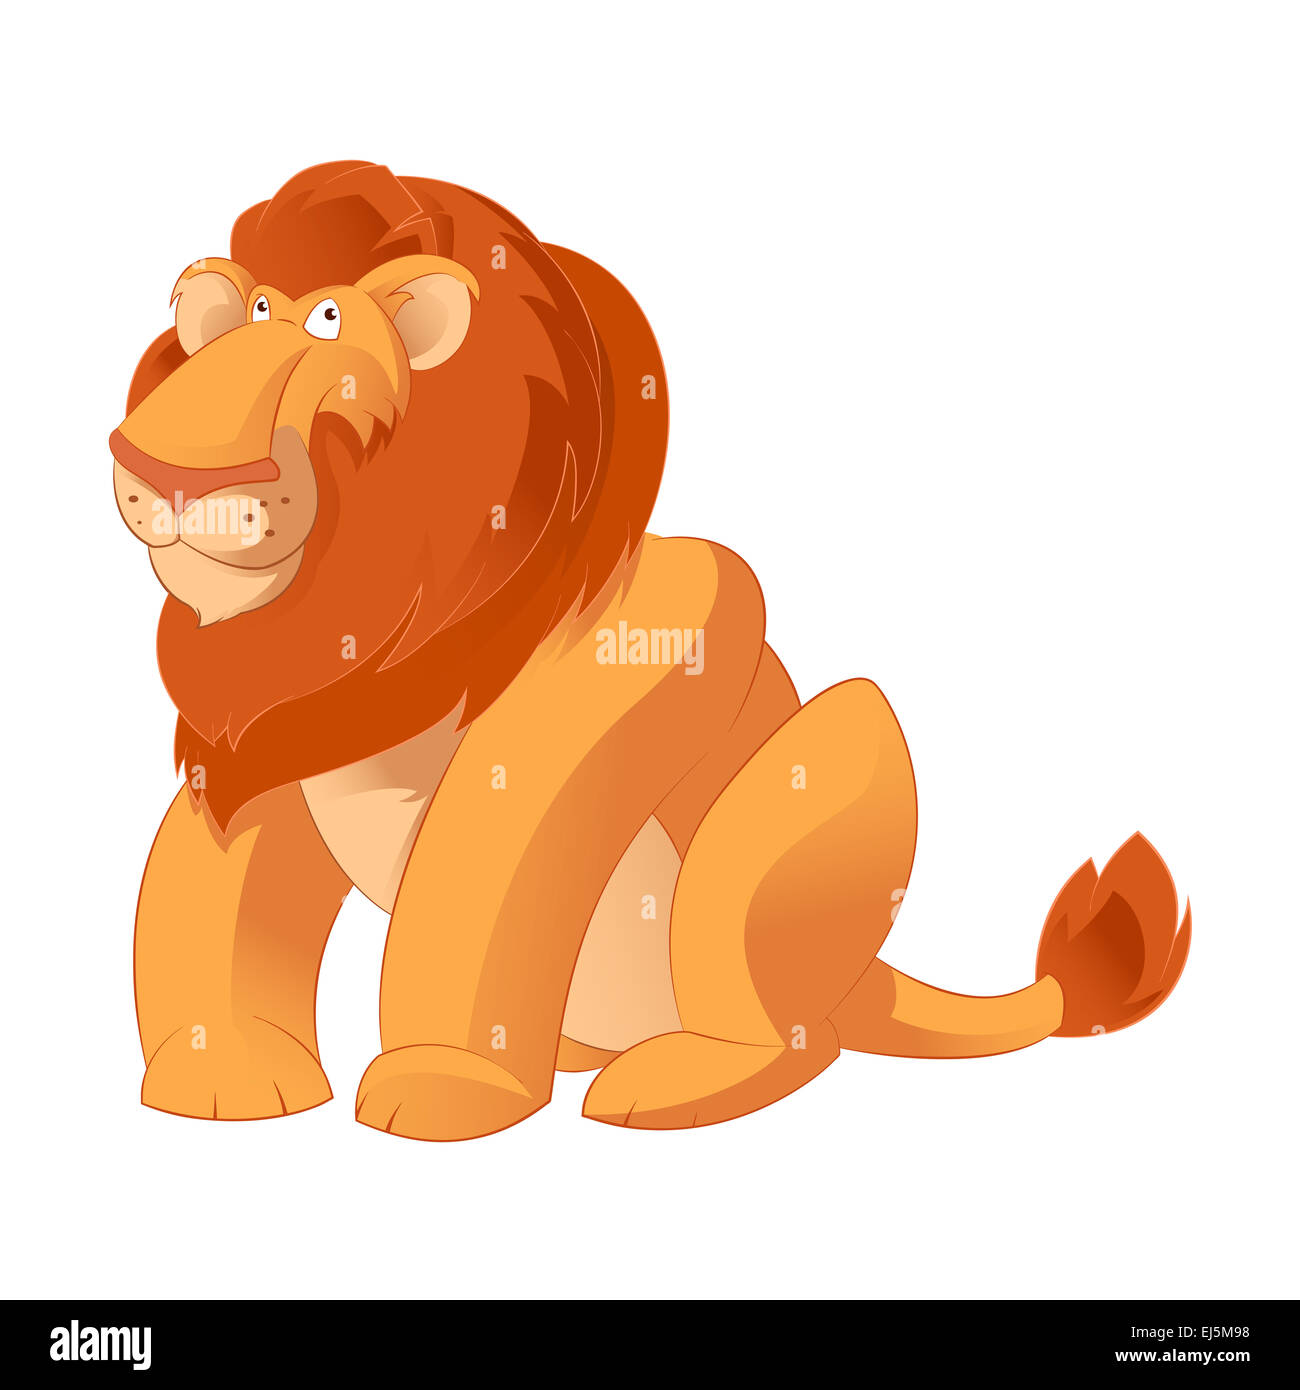 Vector image of a smiling Cartoon Lion Stock Photo